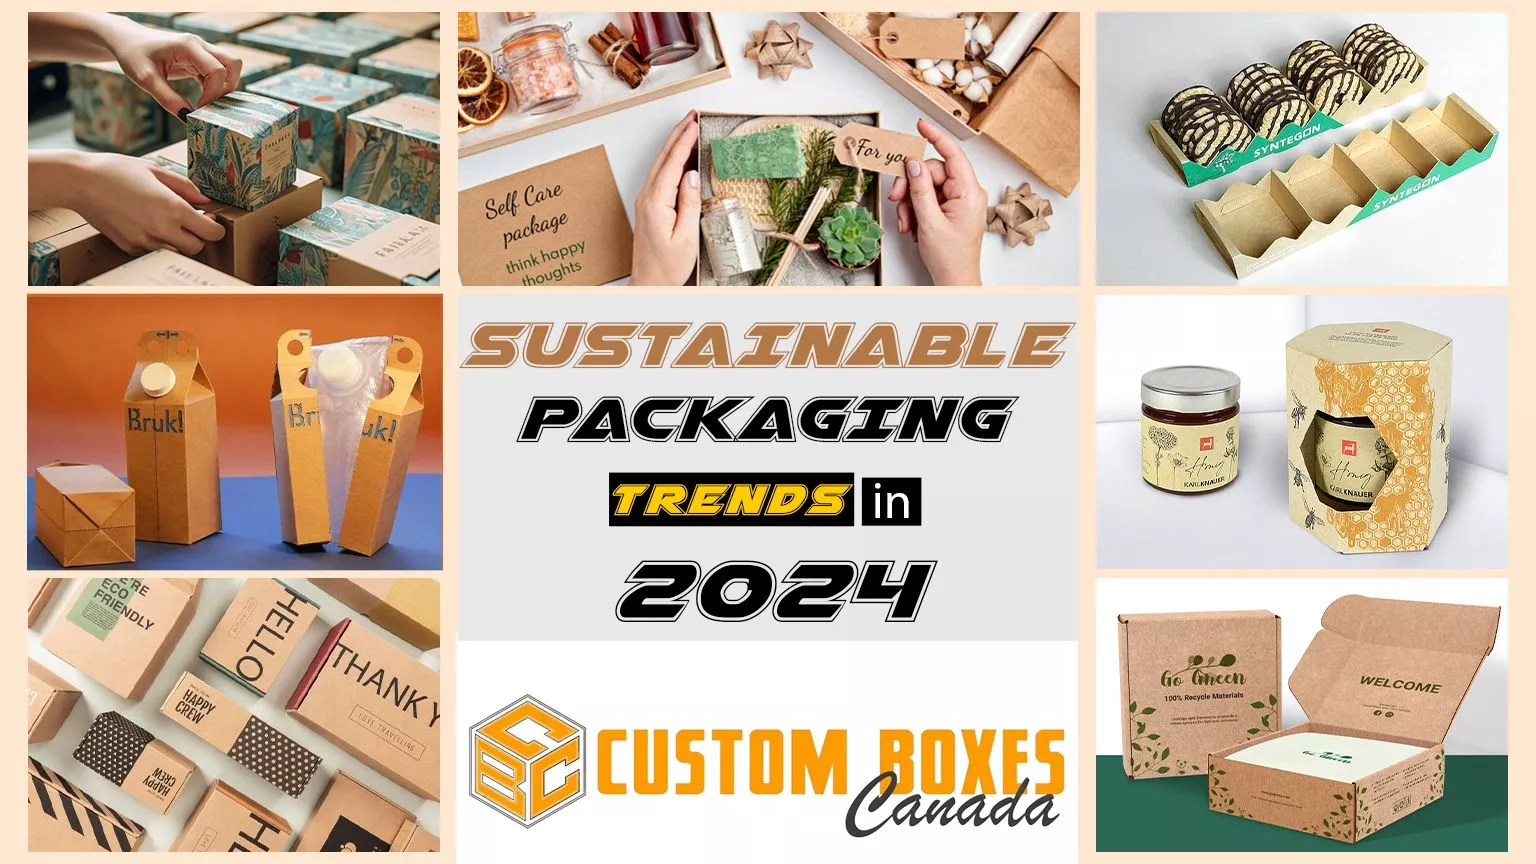 Sustainable packaging trends 2024